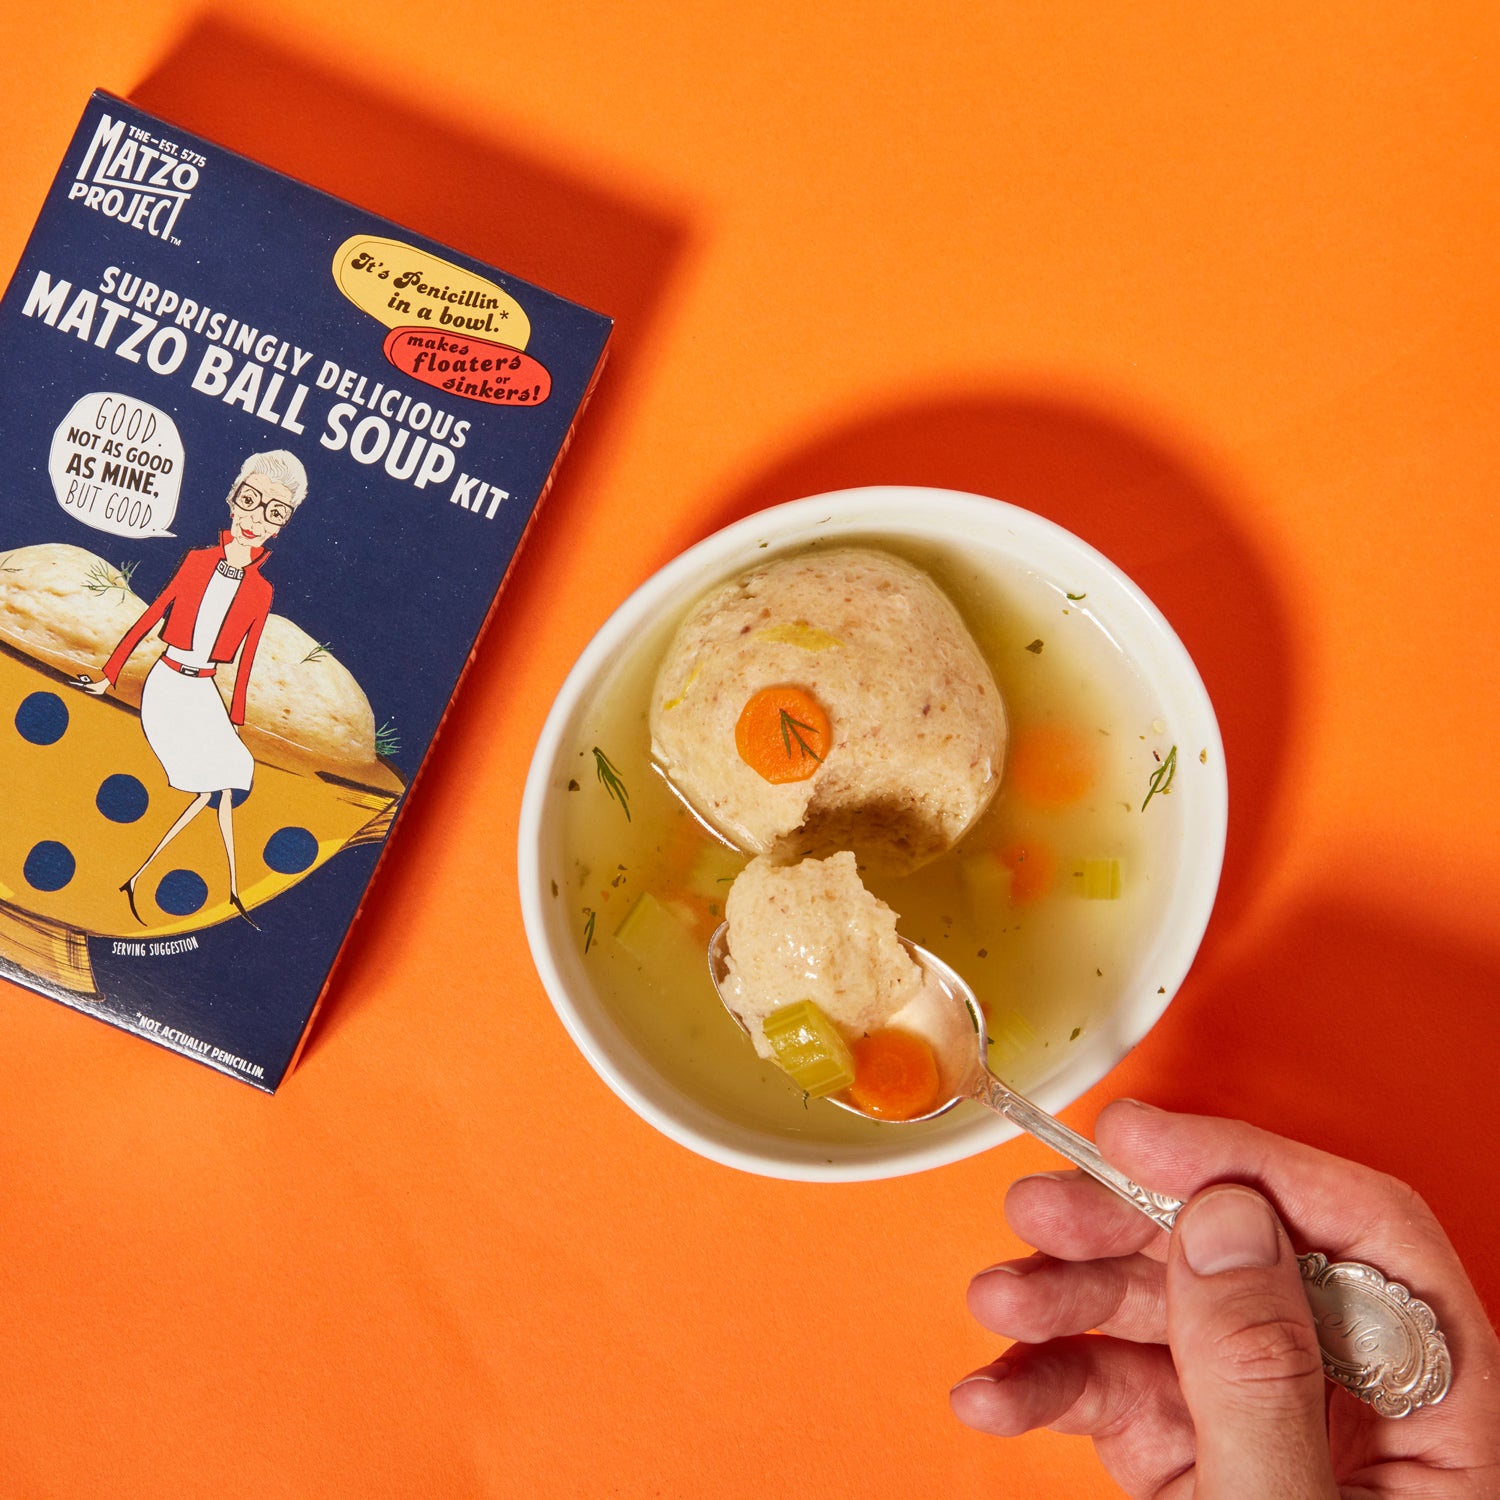 Hand using a spoon to dish out Matzo ball soup